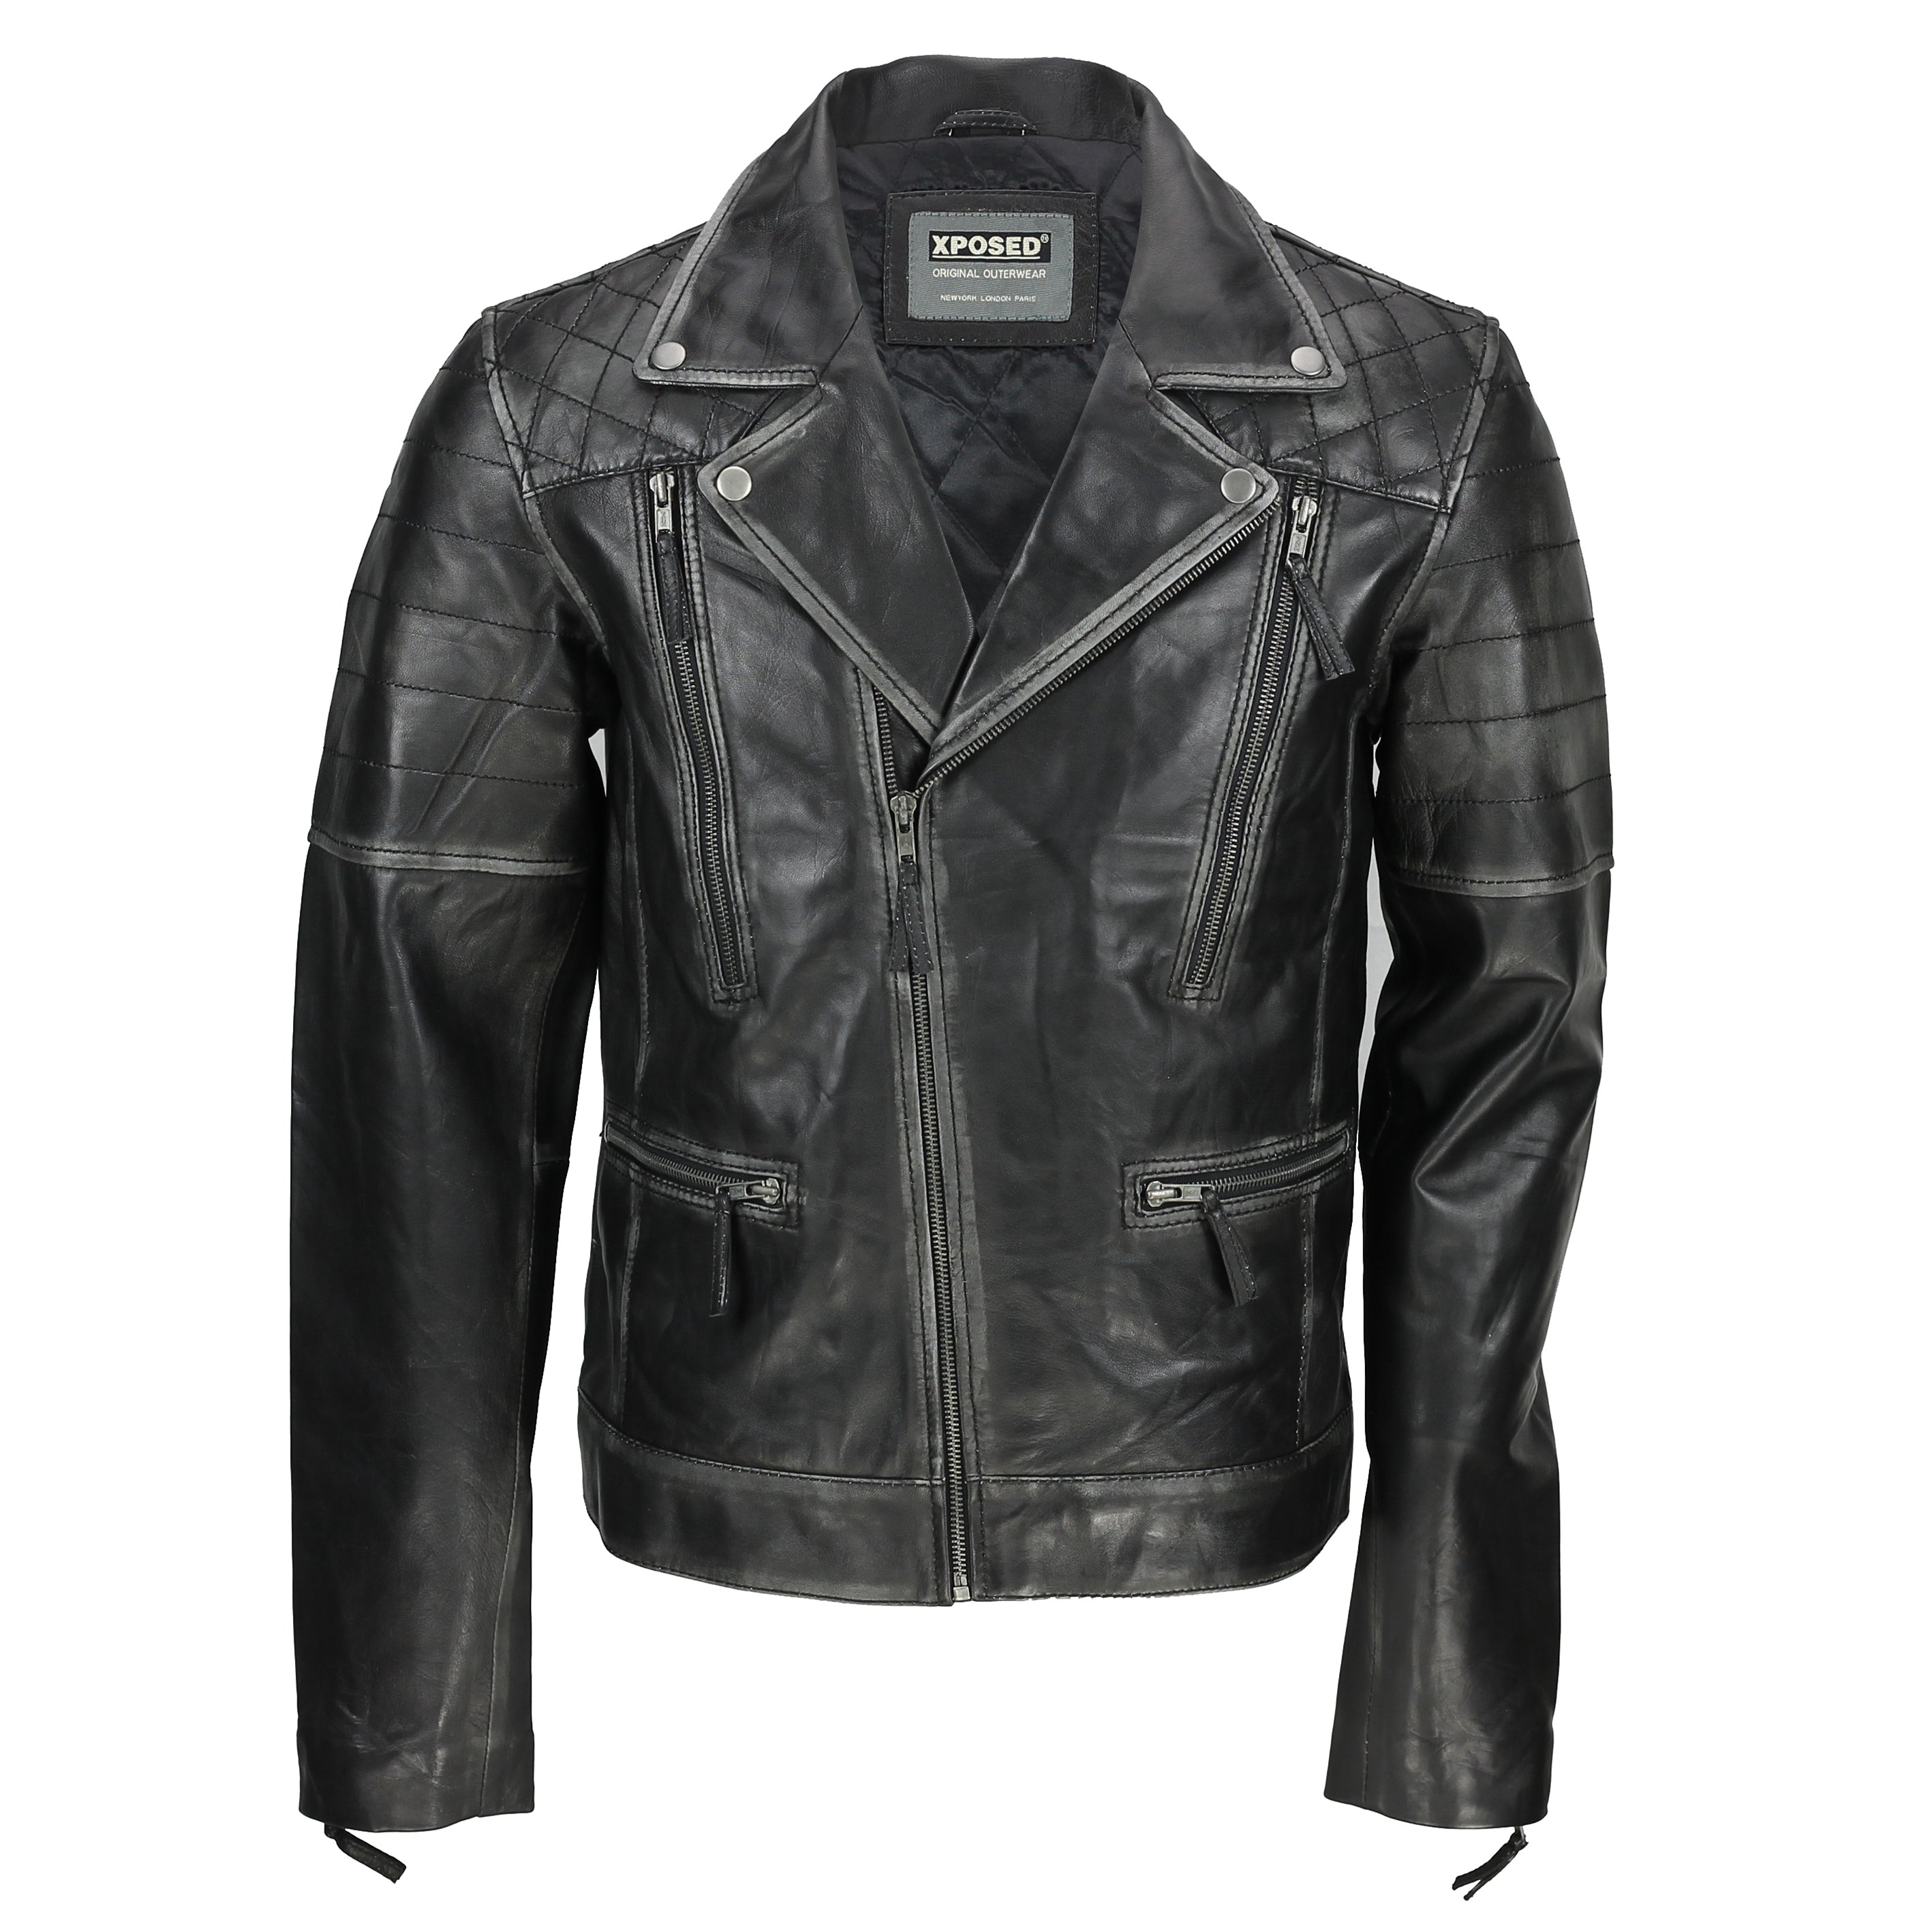 Mens Black Real Leather Biker Style Jacket Vintage Rubbed off Edges Zipped Retro